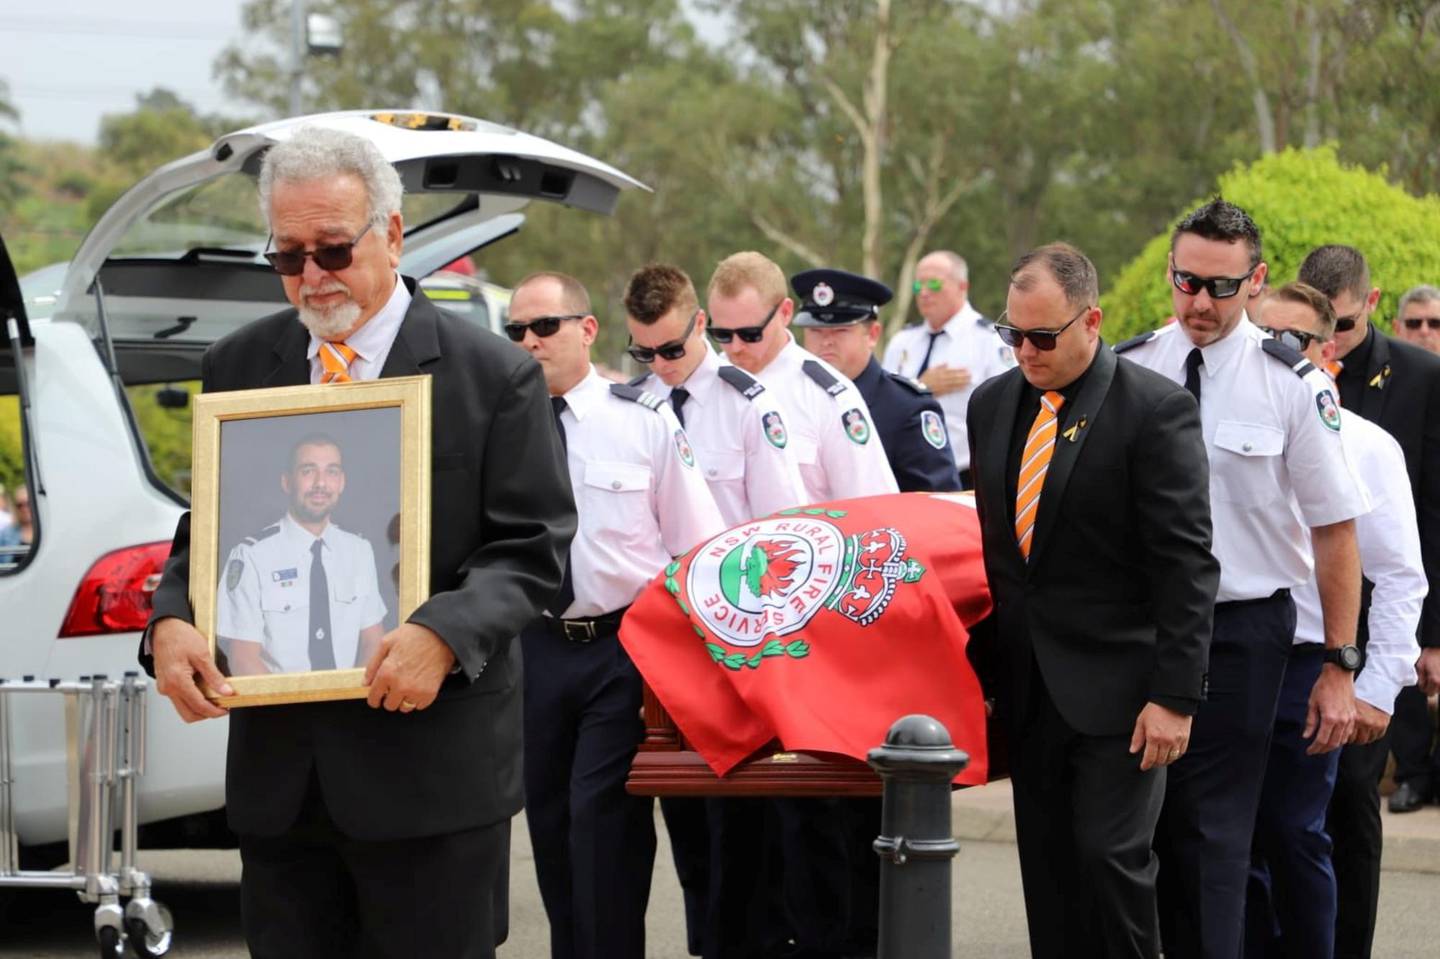 Crew from the Horsley Park RFS carry the casket of NSF RFS volunteer Andrew O'Dwyer during his funeral service in Sydney, Australia, January 7, 2020 in this picture obtained from social media. NSW Rural Fire Service /via REUTERS THIS IMAGE HAS BEEN SUPPLIED BY A THIRD PARTY. MANDATORY CREDIT. NO RESALES. NO ARCHIVES.